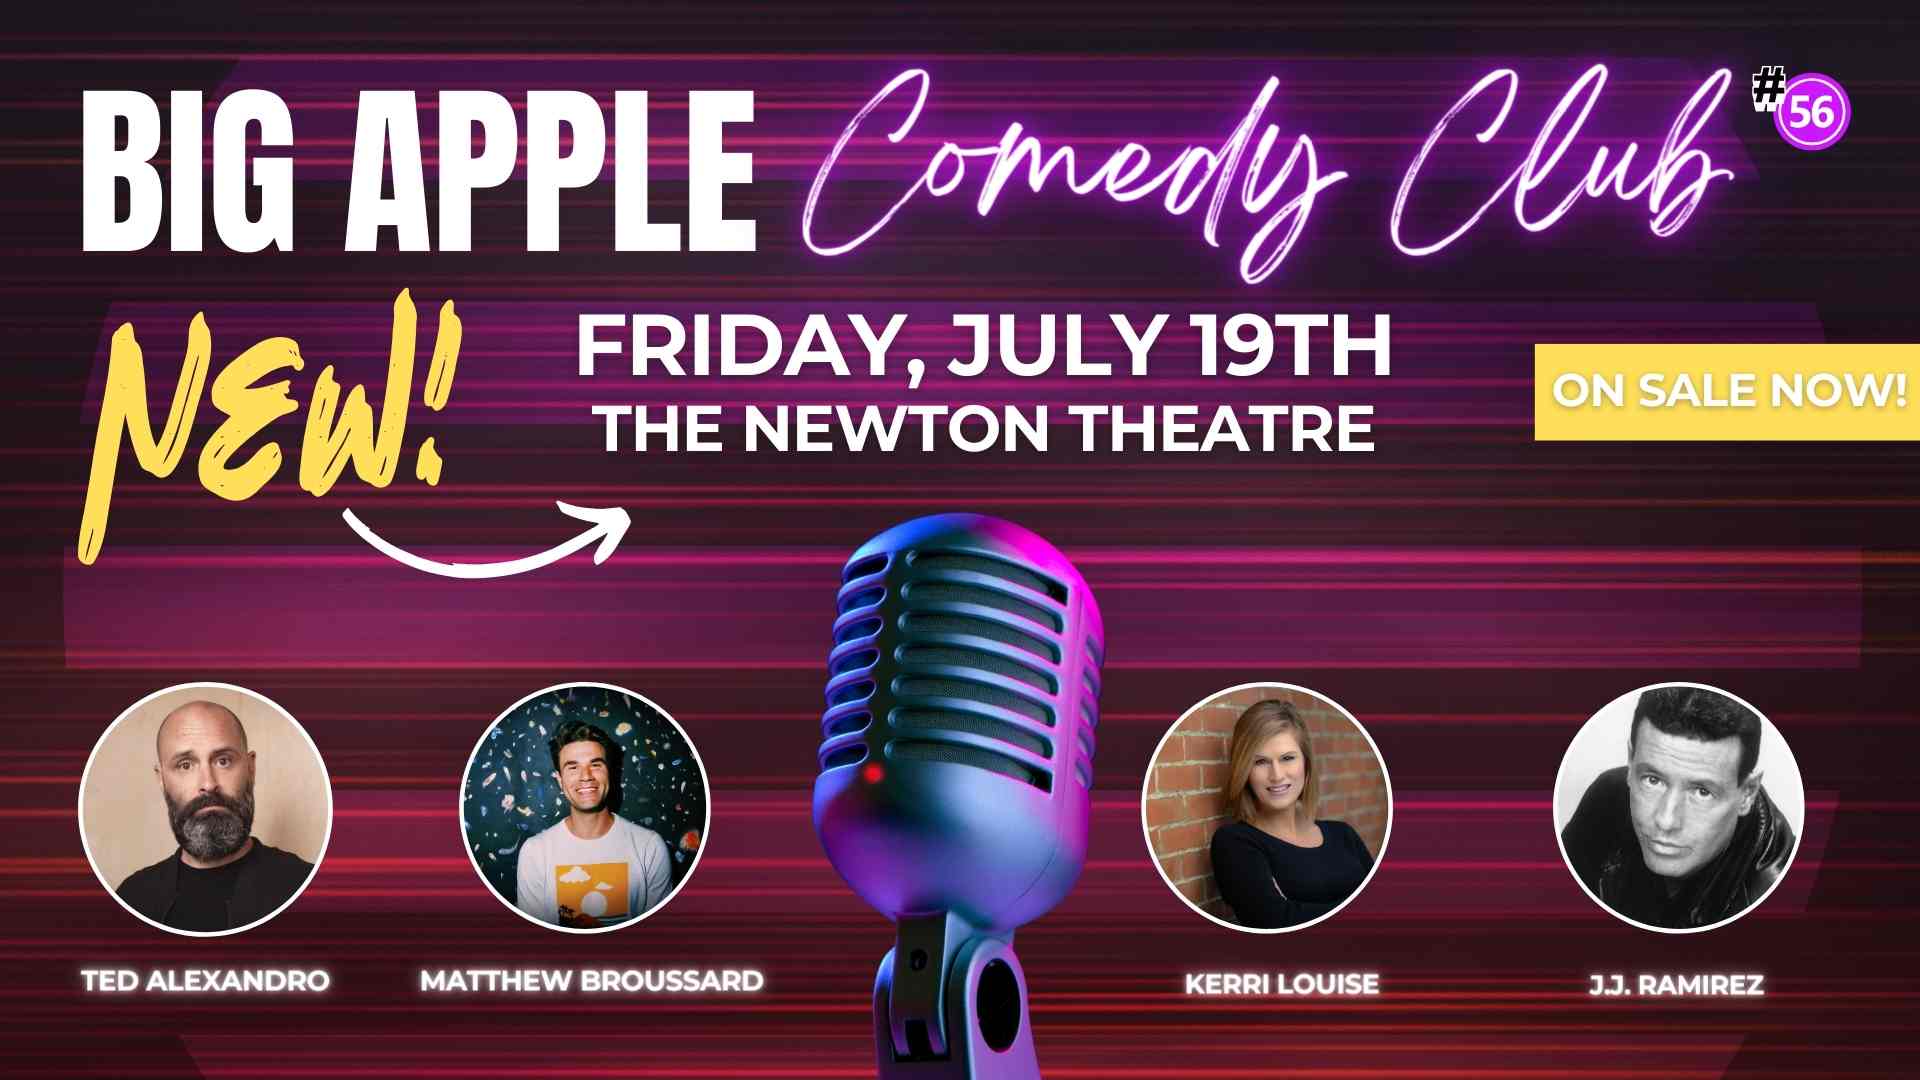 Big Apple Comedy Club #56 comes to The Newton Theatre on Friday, July 19th.